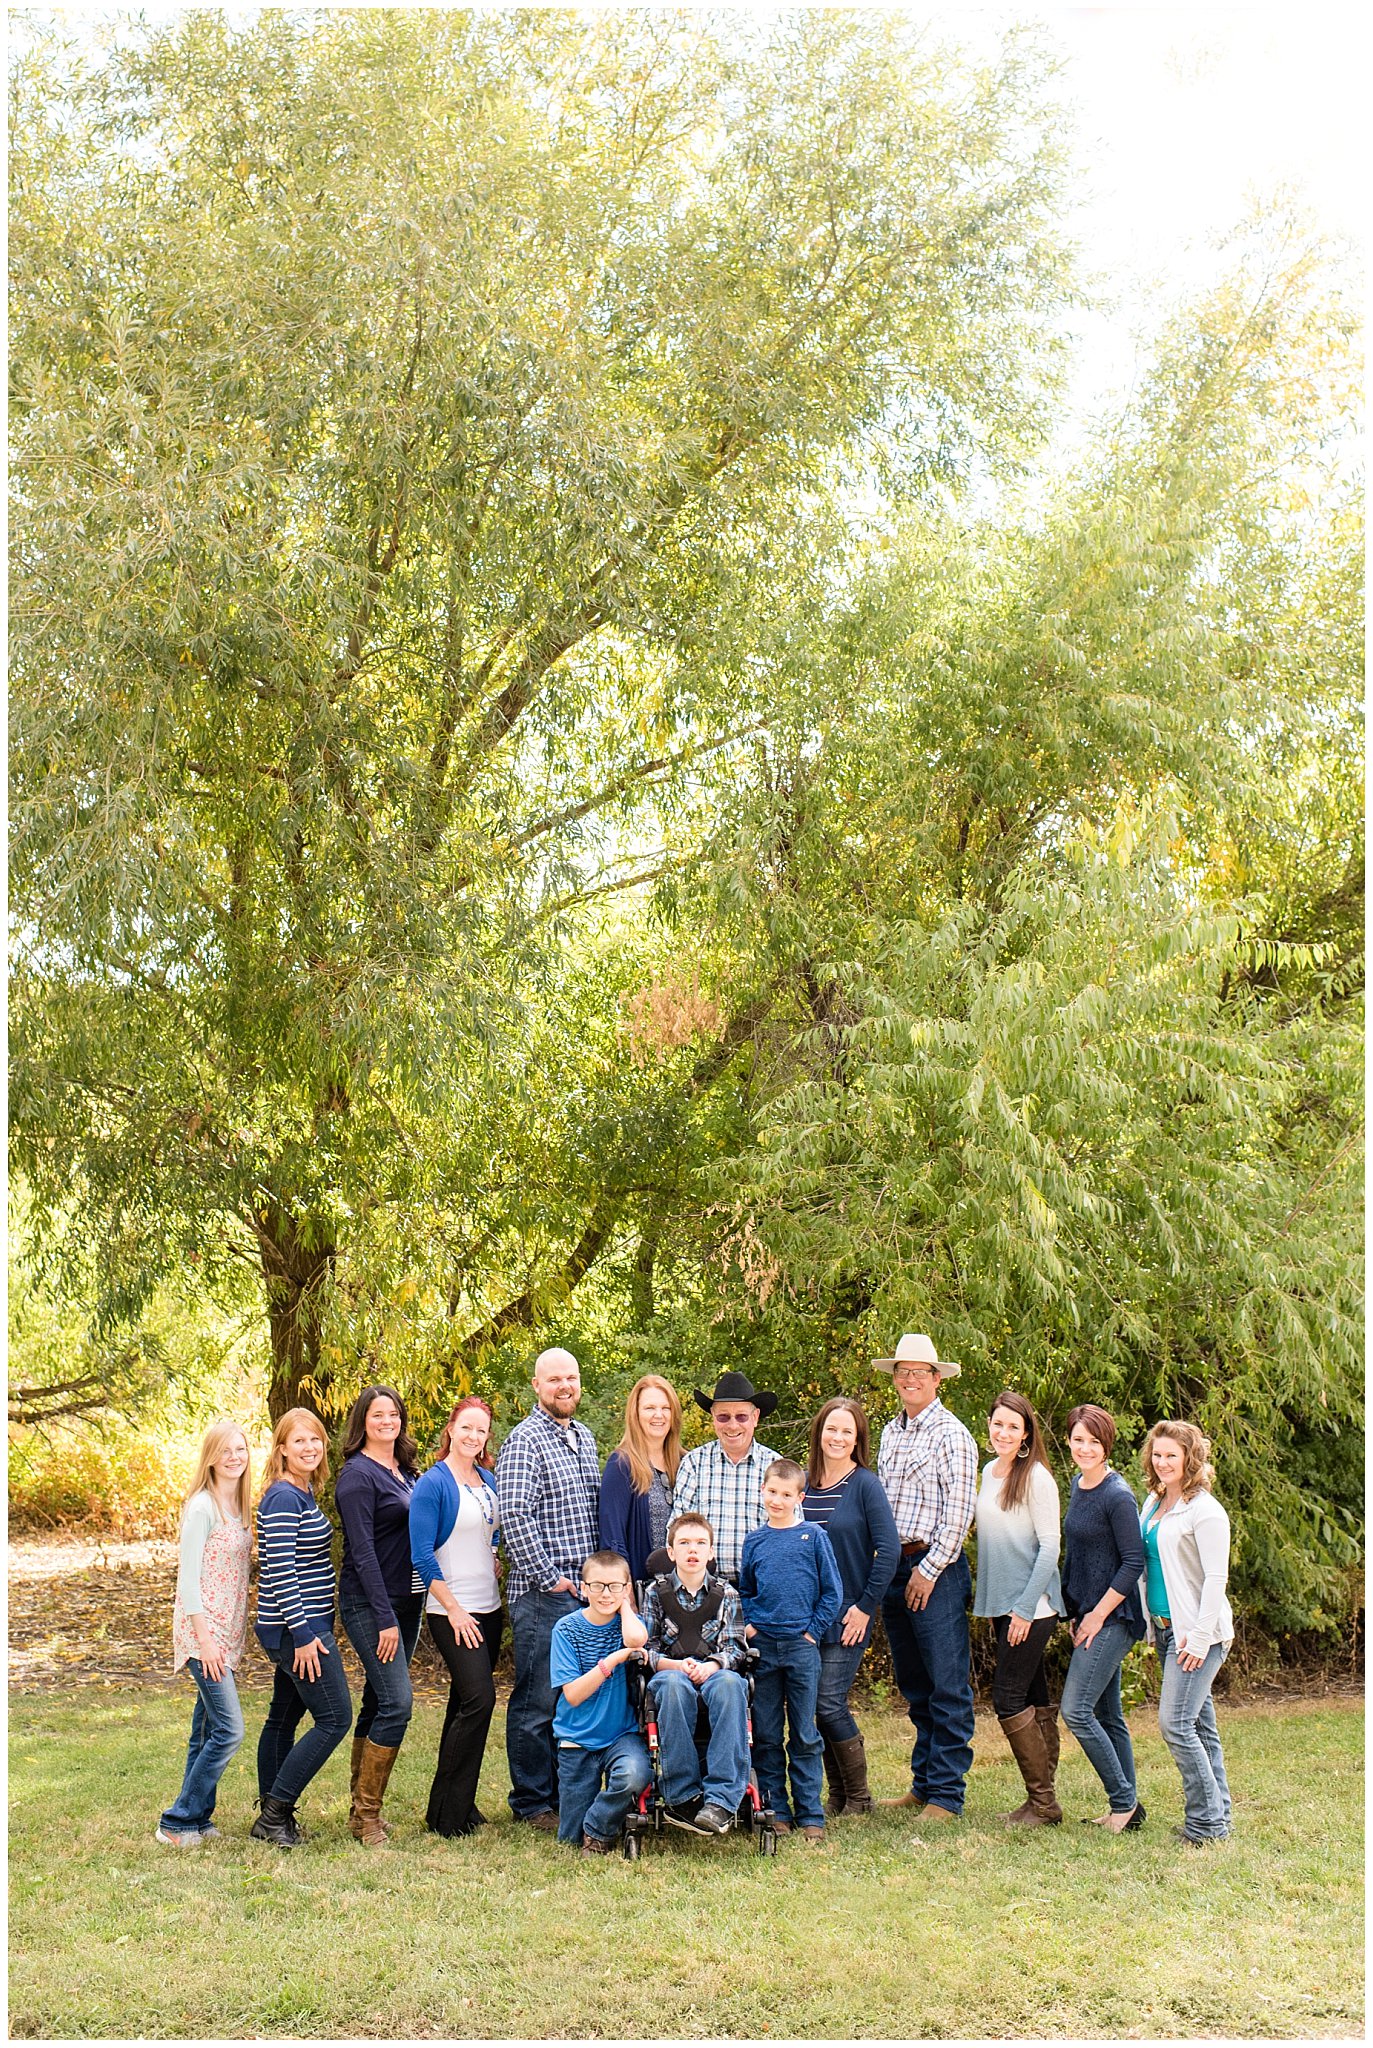 Large family of 12 kids smiling at the camera | Tremonton Family Pictures and Make a Wish Event | Jessie and Dallin Photography